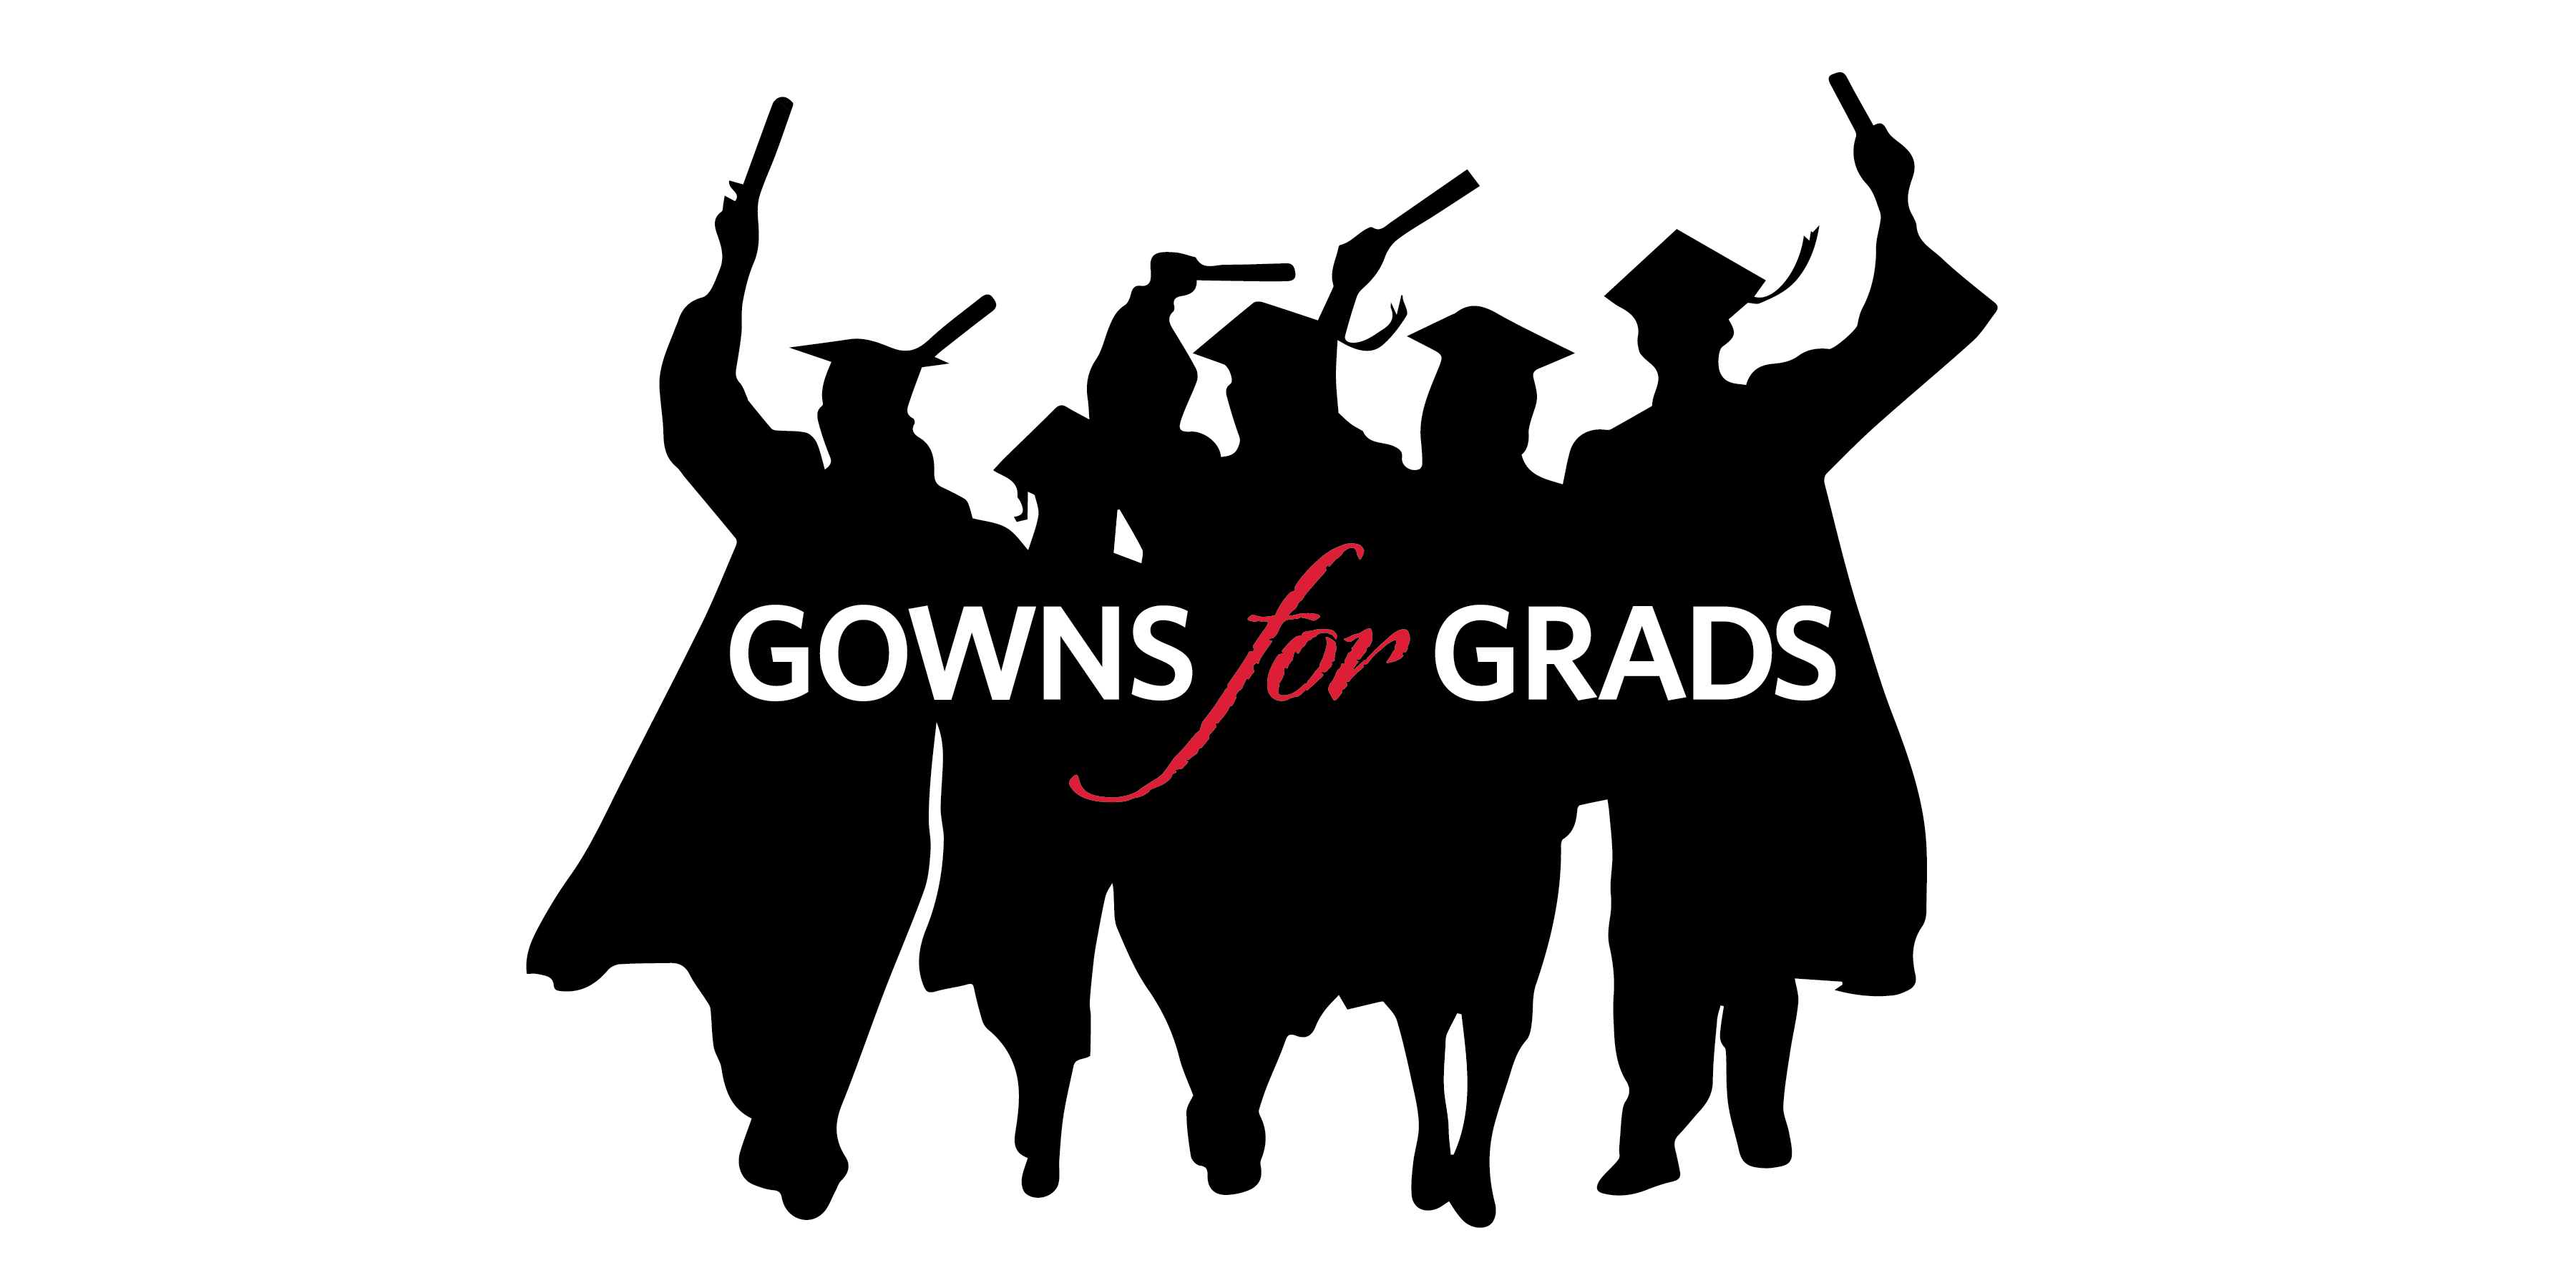 Logo of Gowns for Grads with silhouettes of graduates